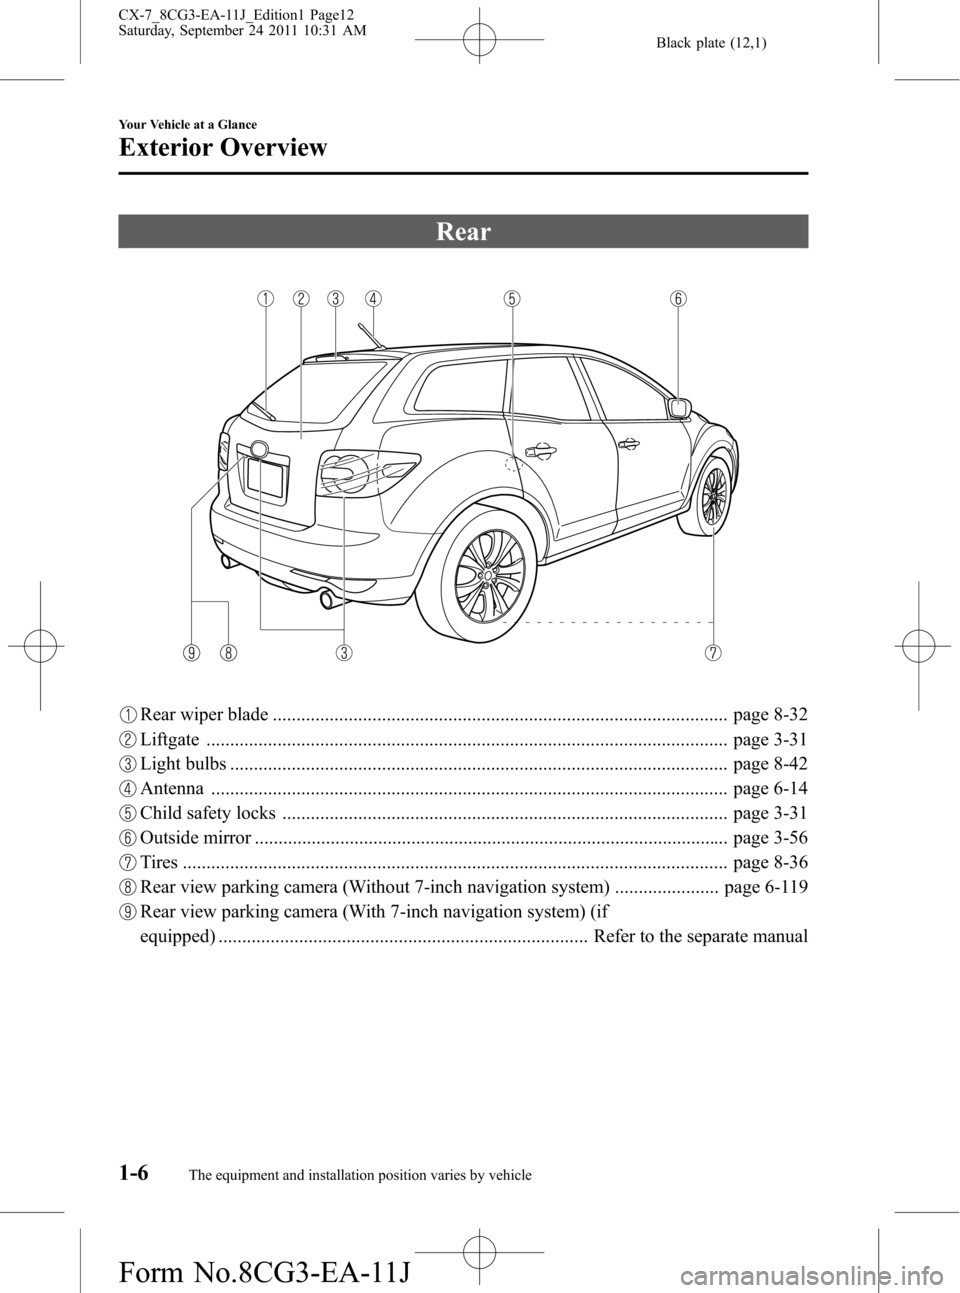 MAZDA MODEL CX-7 2012  Owners Manual (in English) Black plate (12,1)
Rear
Rear wiper blade ................................................................................................ page 8-32
Liftgate ...........................................